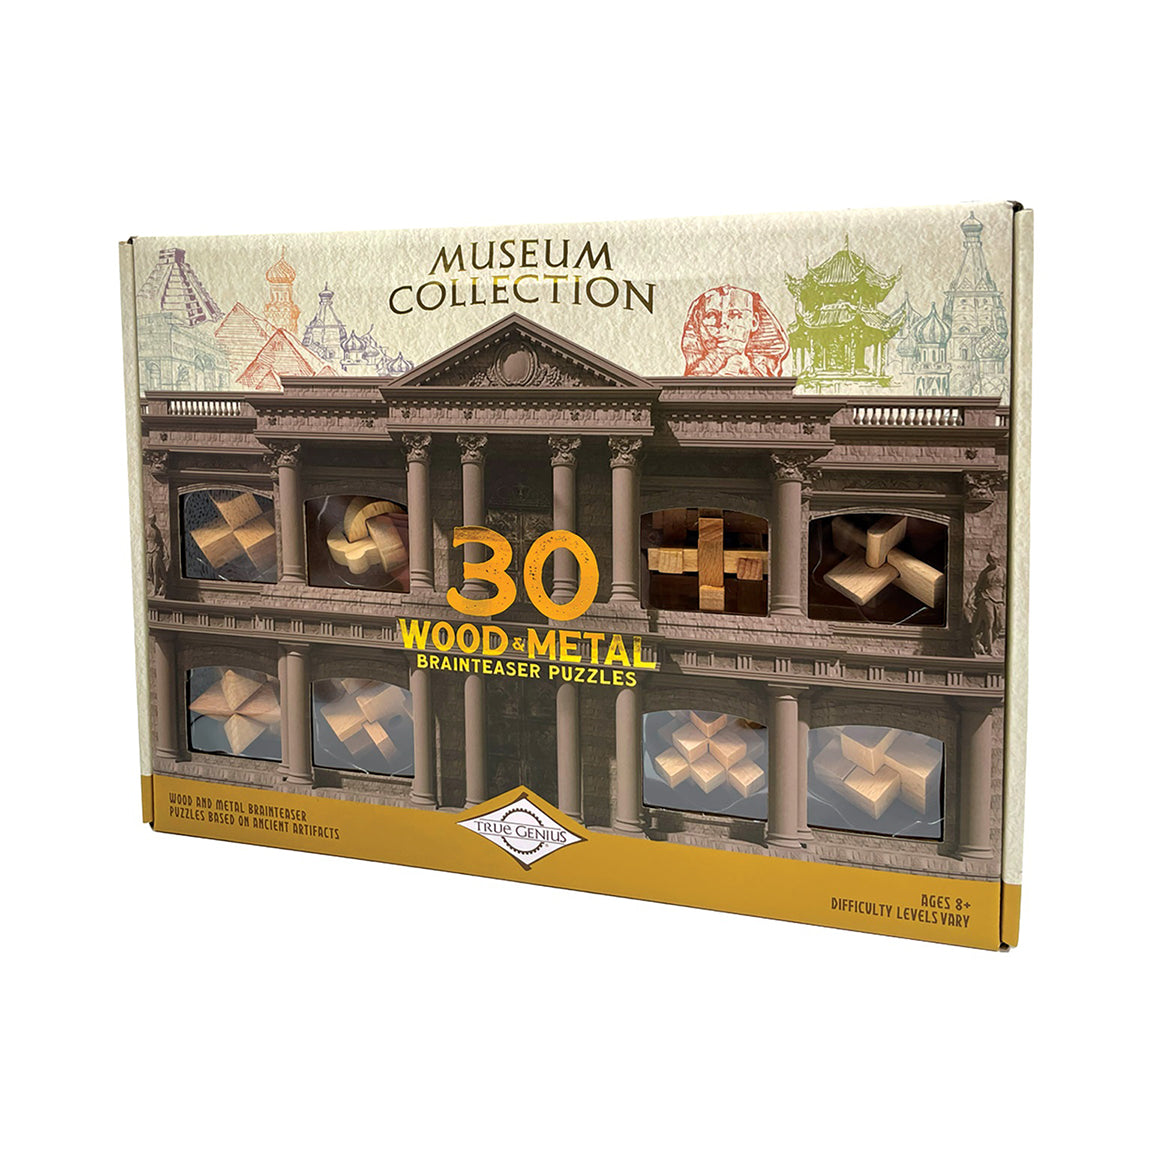 Museum Collection Puzzle Set - Getty Museum Store